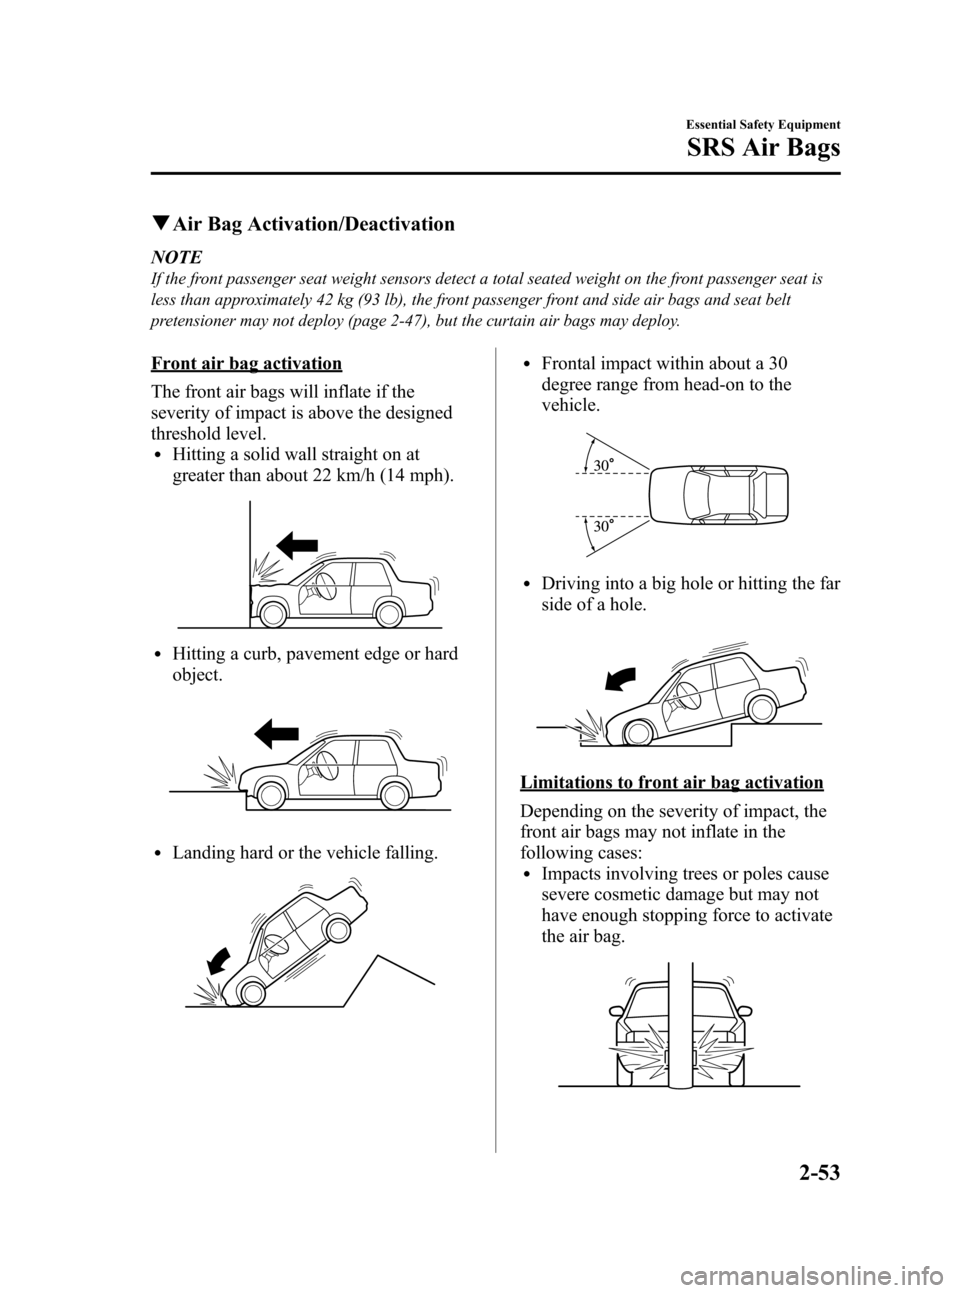 MAZDA MODEL 3 HATCHBACK 2008   (in English) Repair Manual Black plate (67,1)
qAir Bag Activation/Deactivation
NOTE
If the front passenger seat weight sensors detect a total seated weight on the front passenger seat is
less than approximately 42 kg (93 lb), t